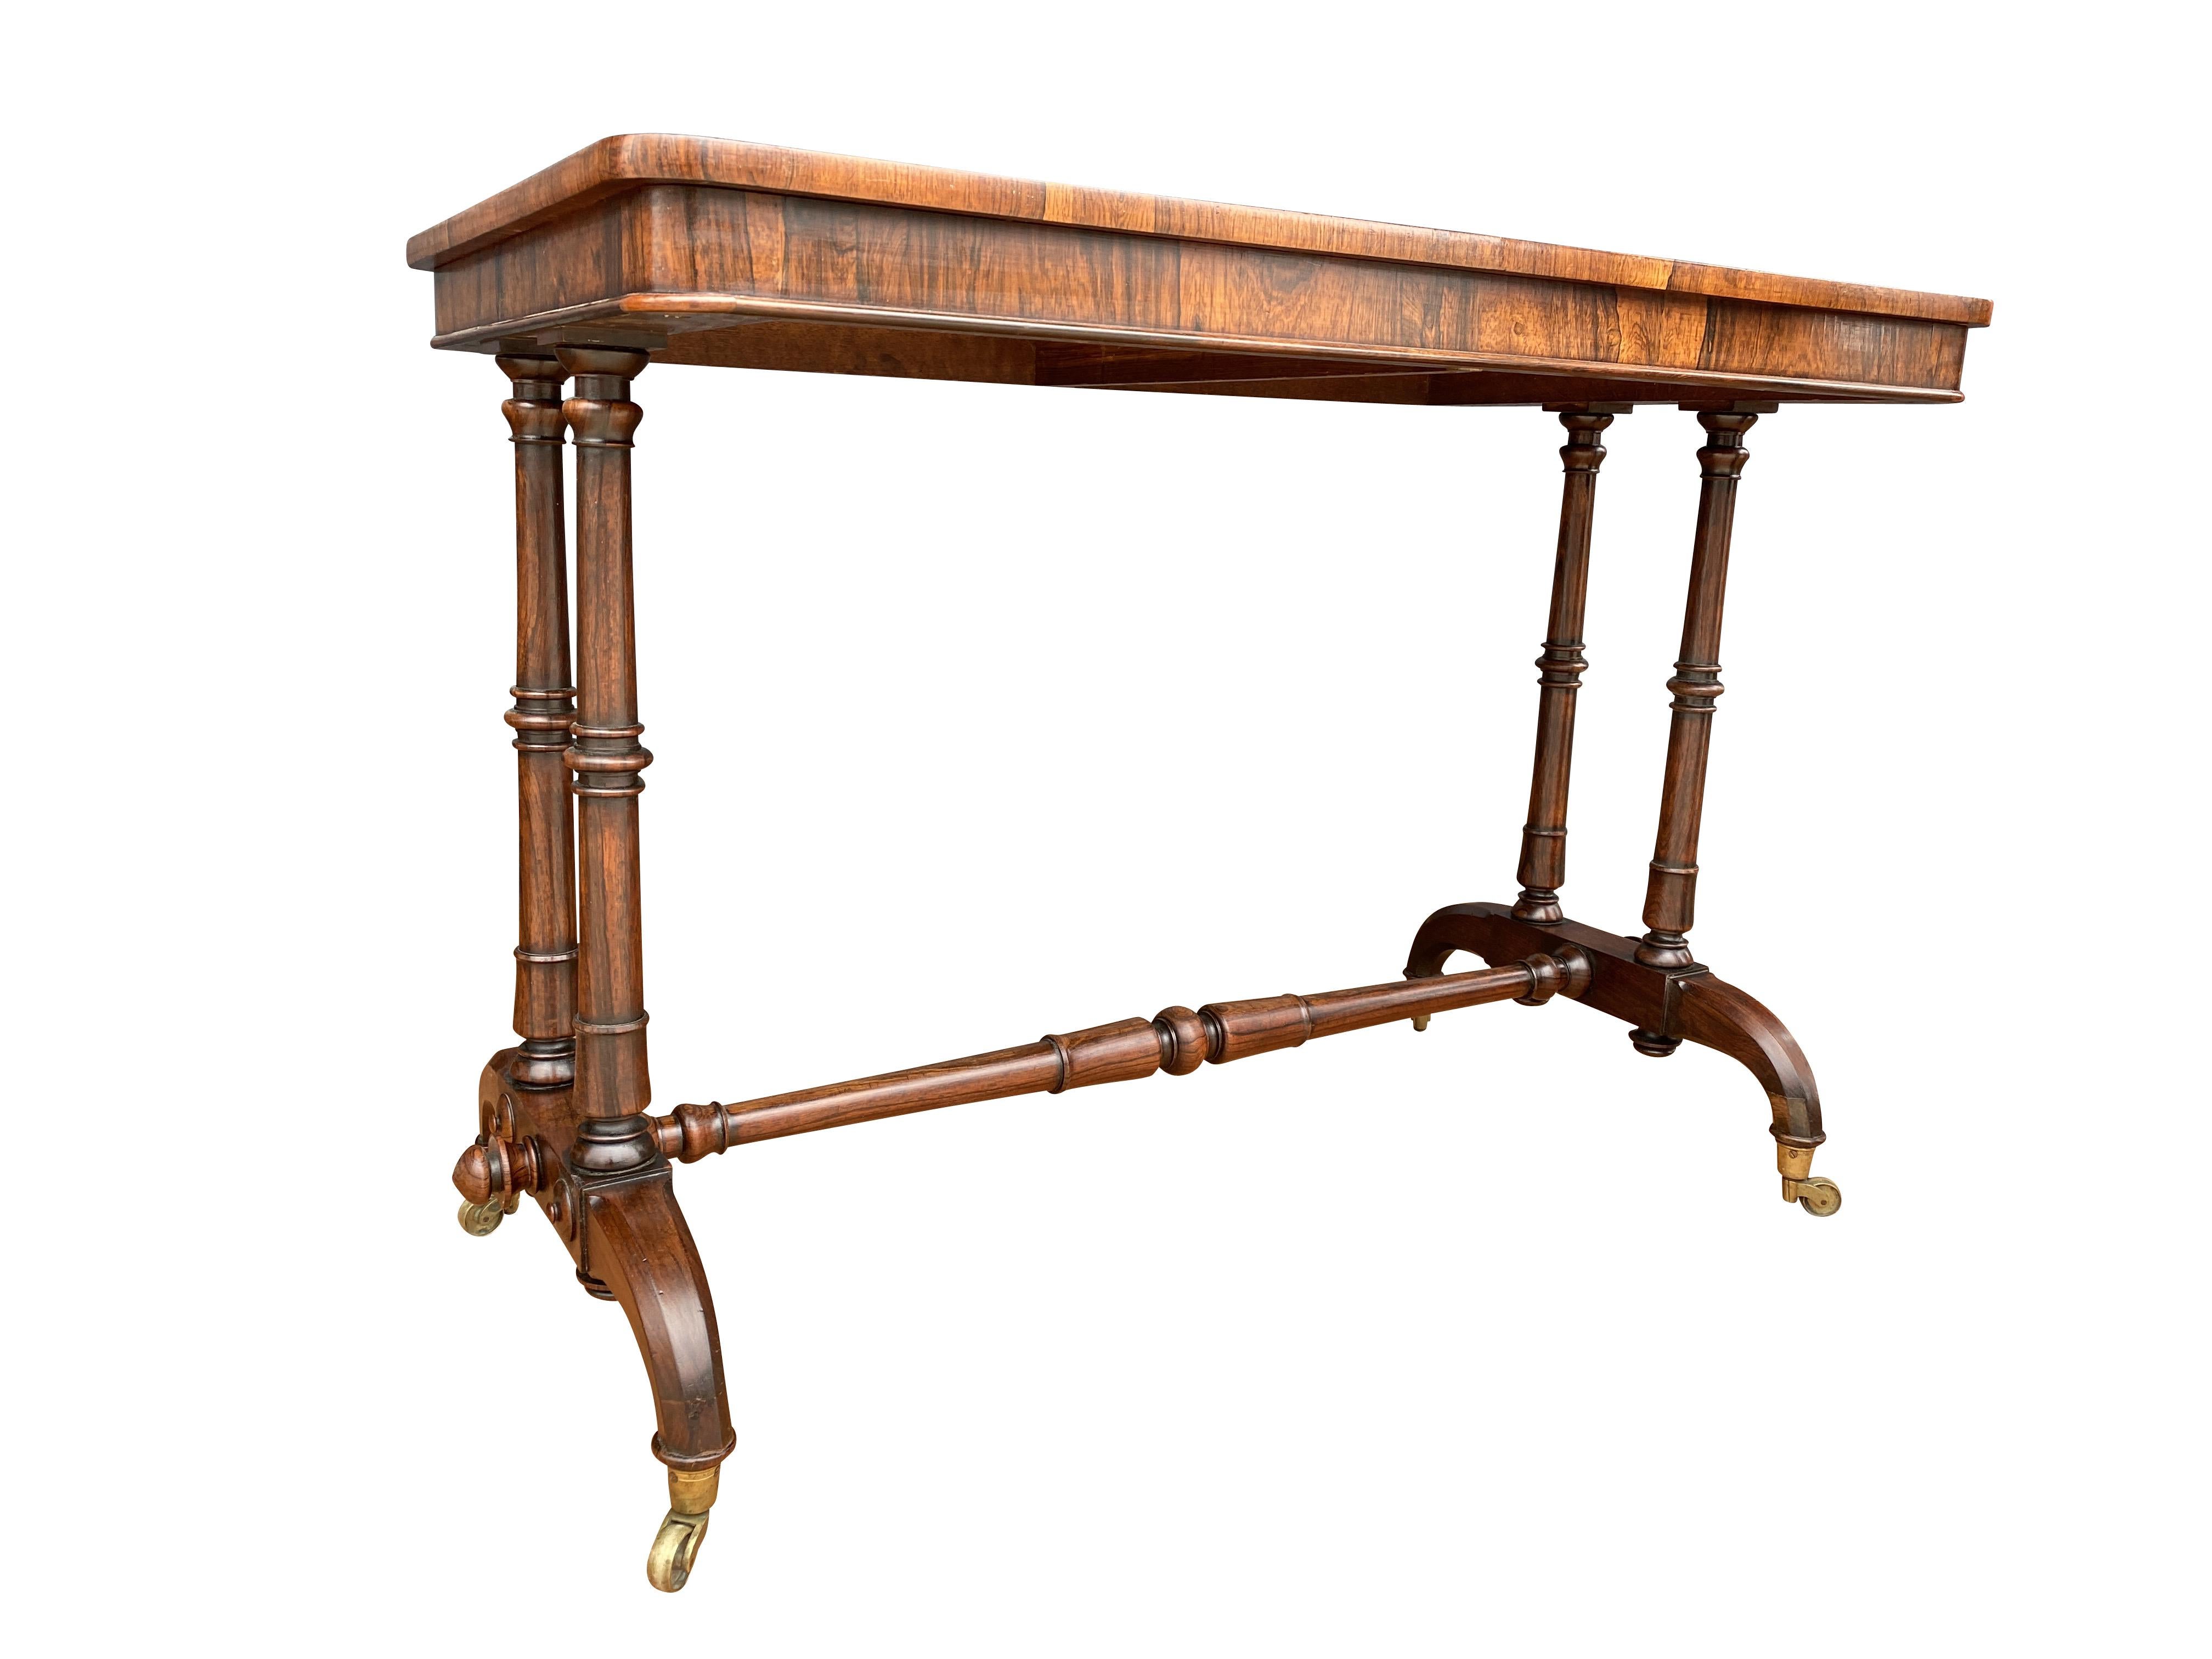 Rectangular top with rounded corners and conforming frieze, raised on turned legs joined by a turned stretcher, carved shaped legs and casters.